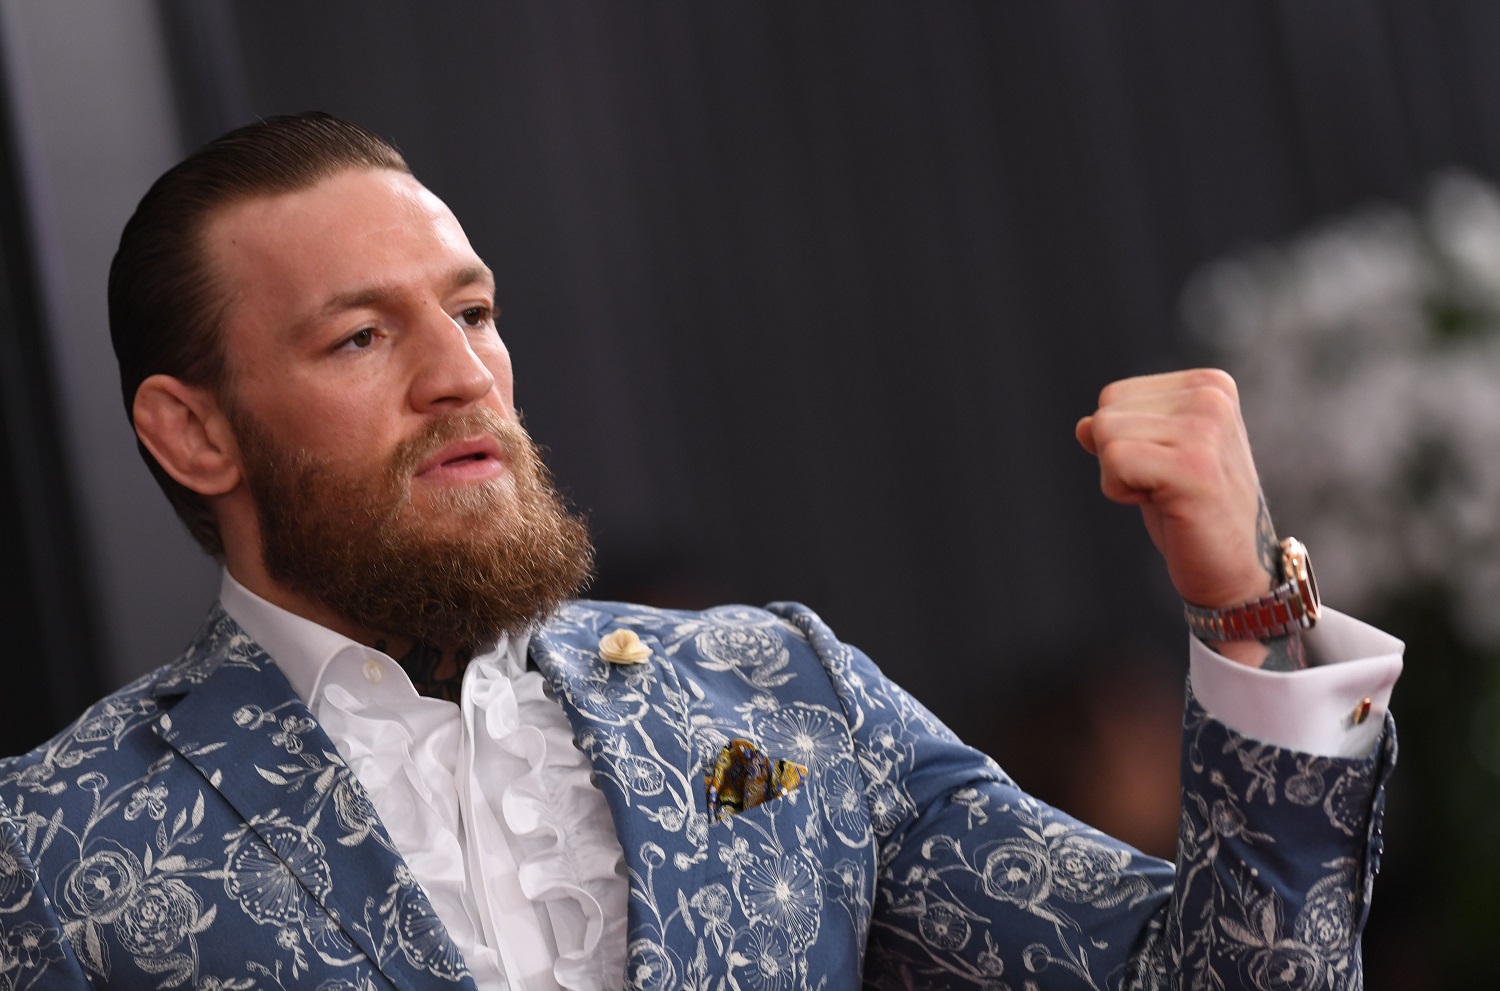 ‘Retired’ Conor McGregor Accepts a Challenge From Diego Sanchez But Then Says He’s Boxing Manny Pacquiao